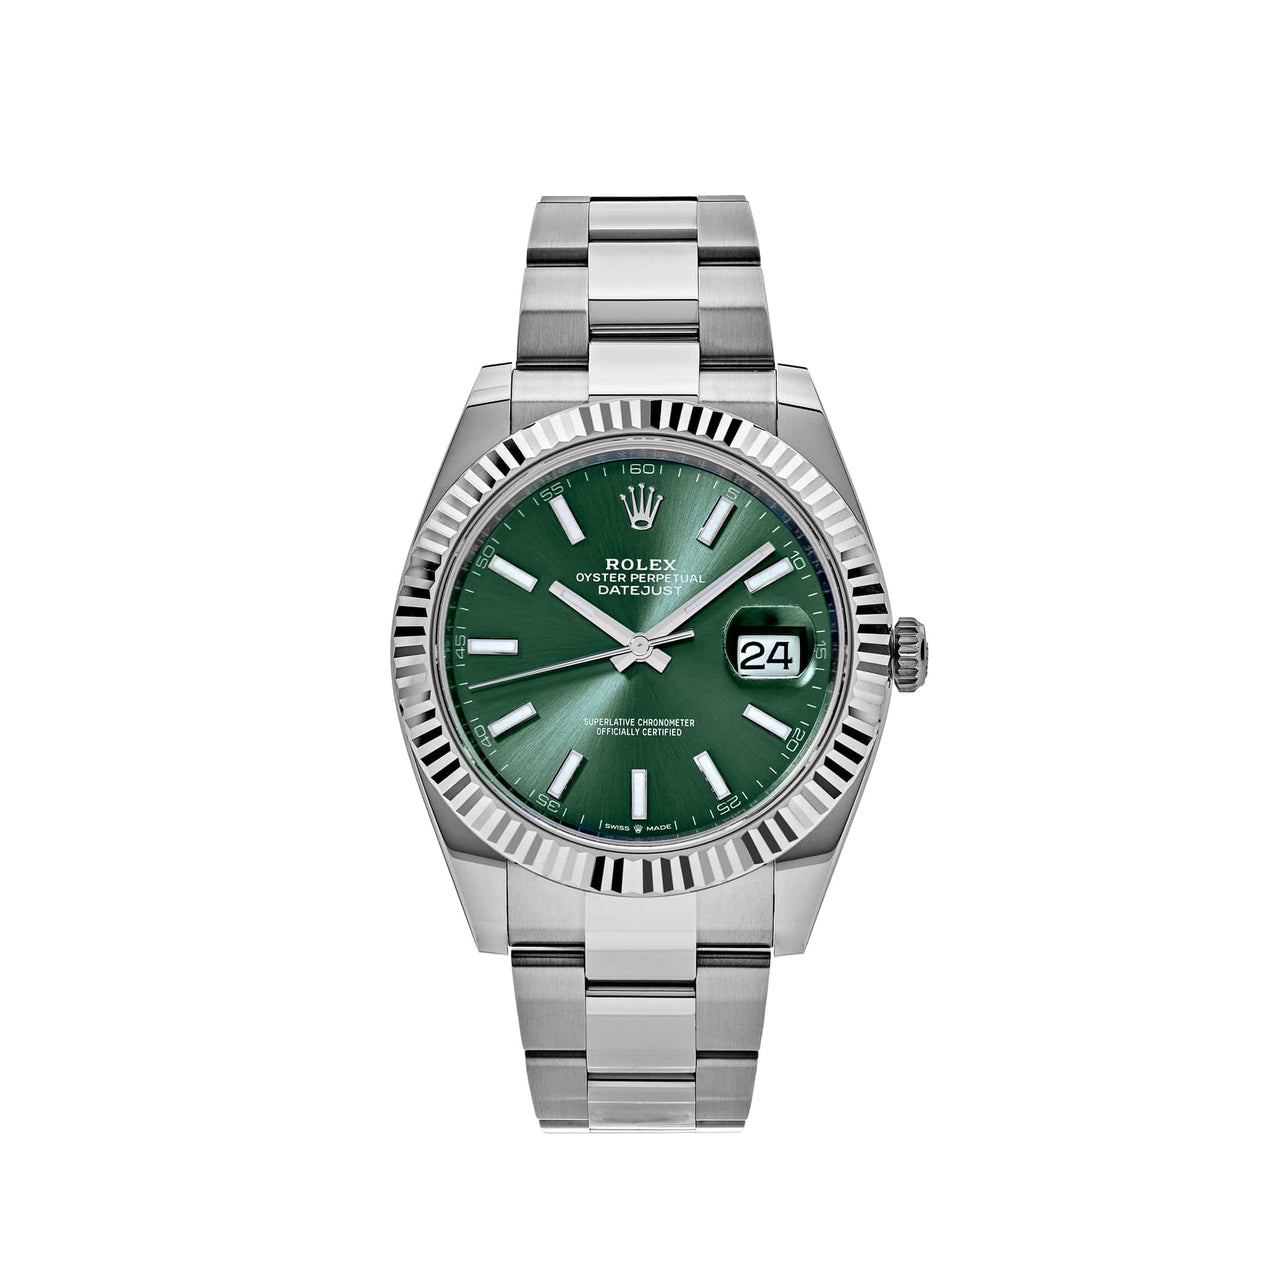 Rolex Datejust 126334 Stainless Steel and White Gold Mint Green Dial Oyster